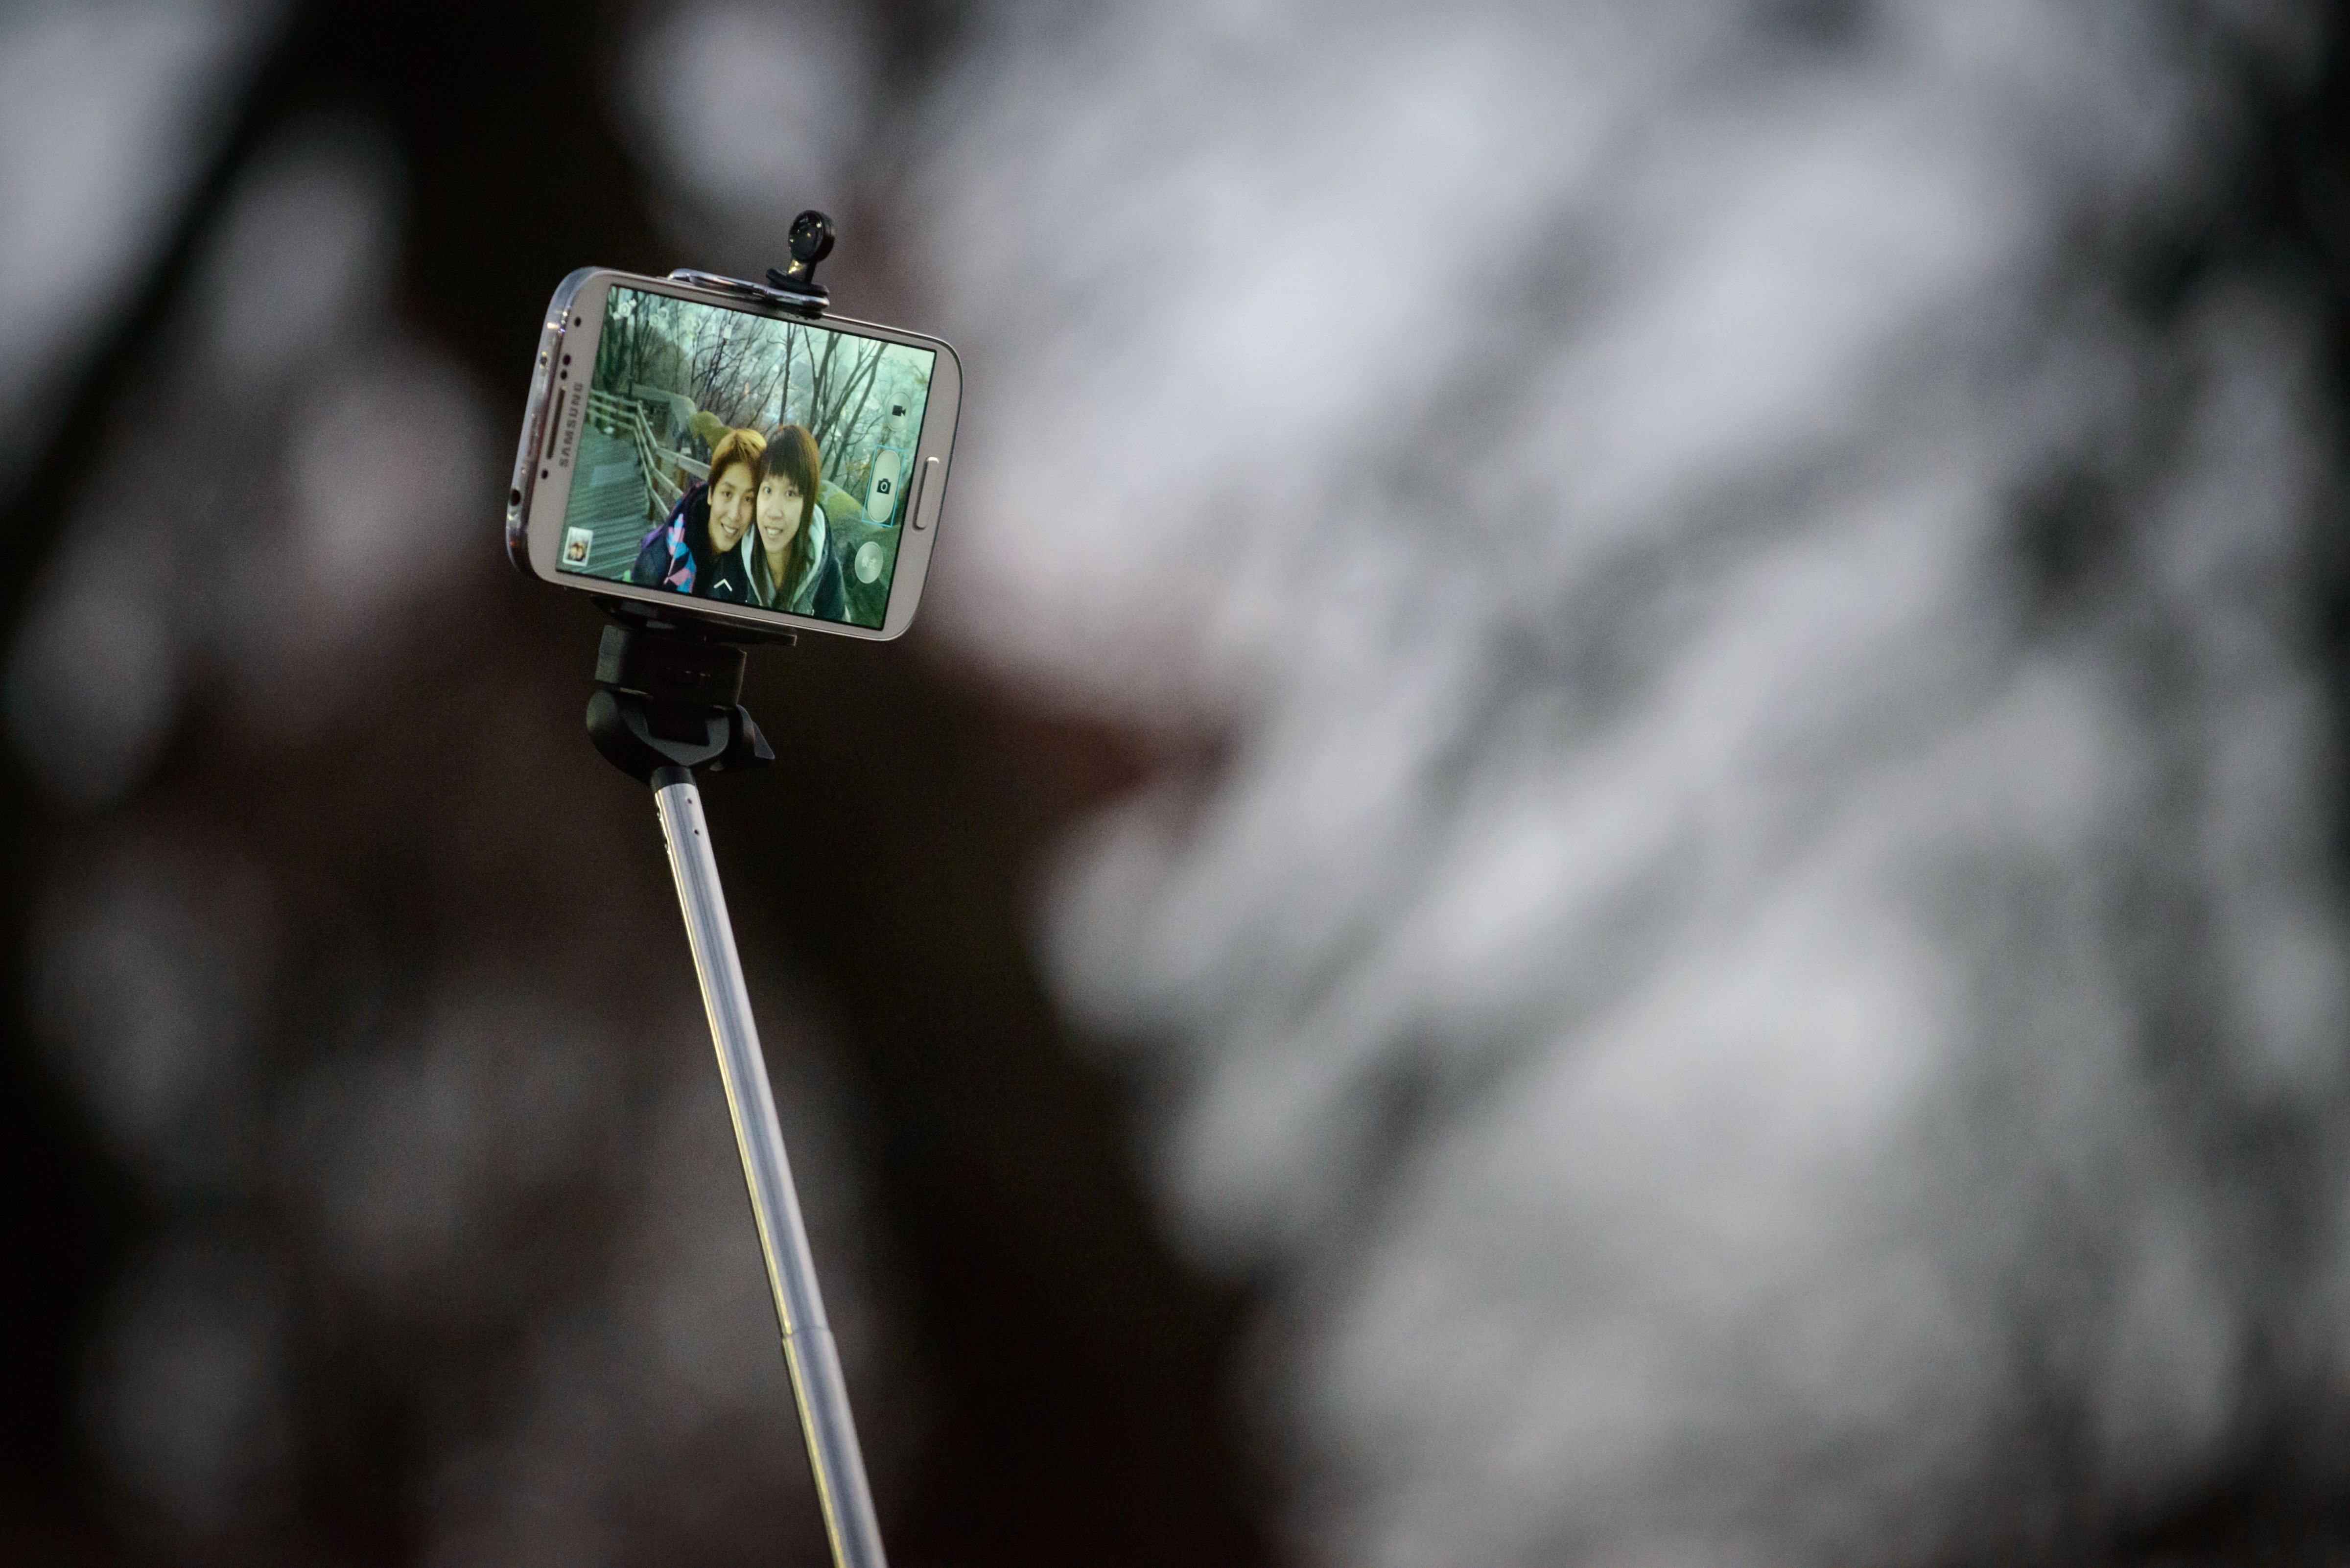 A couple use a 'selfie stick' to take a photo at a popular tourist spot in Seoul on Nov. 26, 2014.